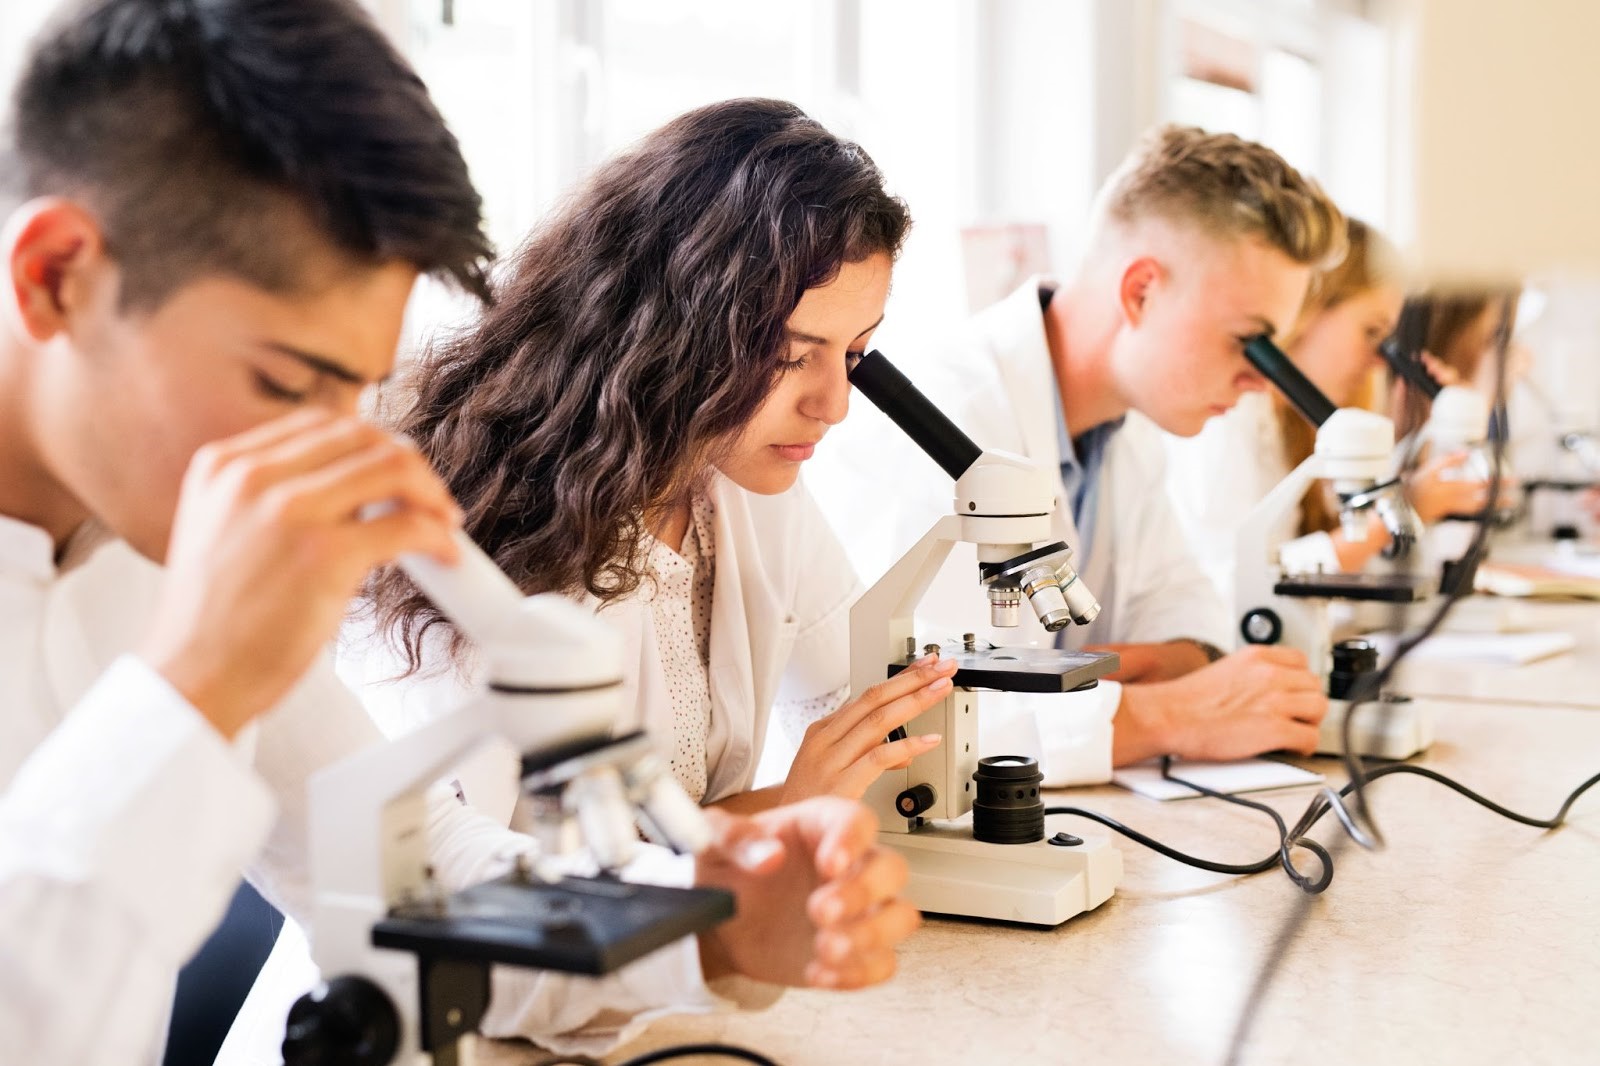 What to Consider When Investing in Microscopes for Education